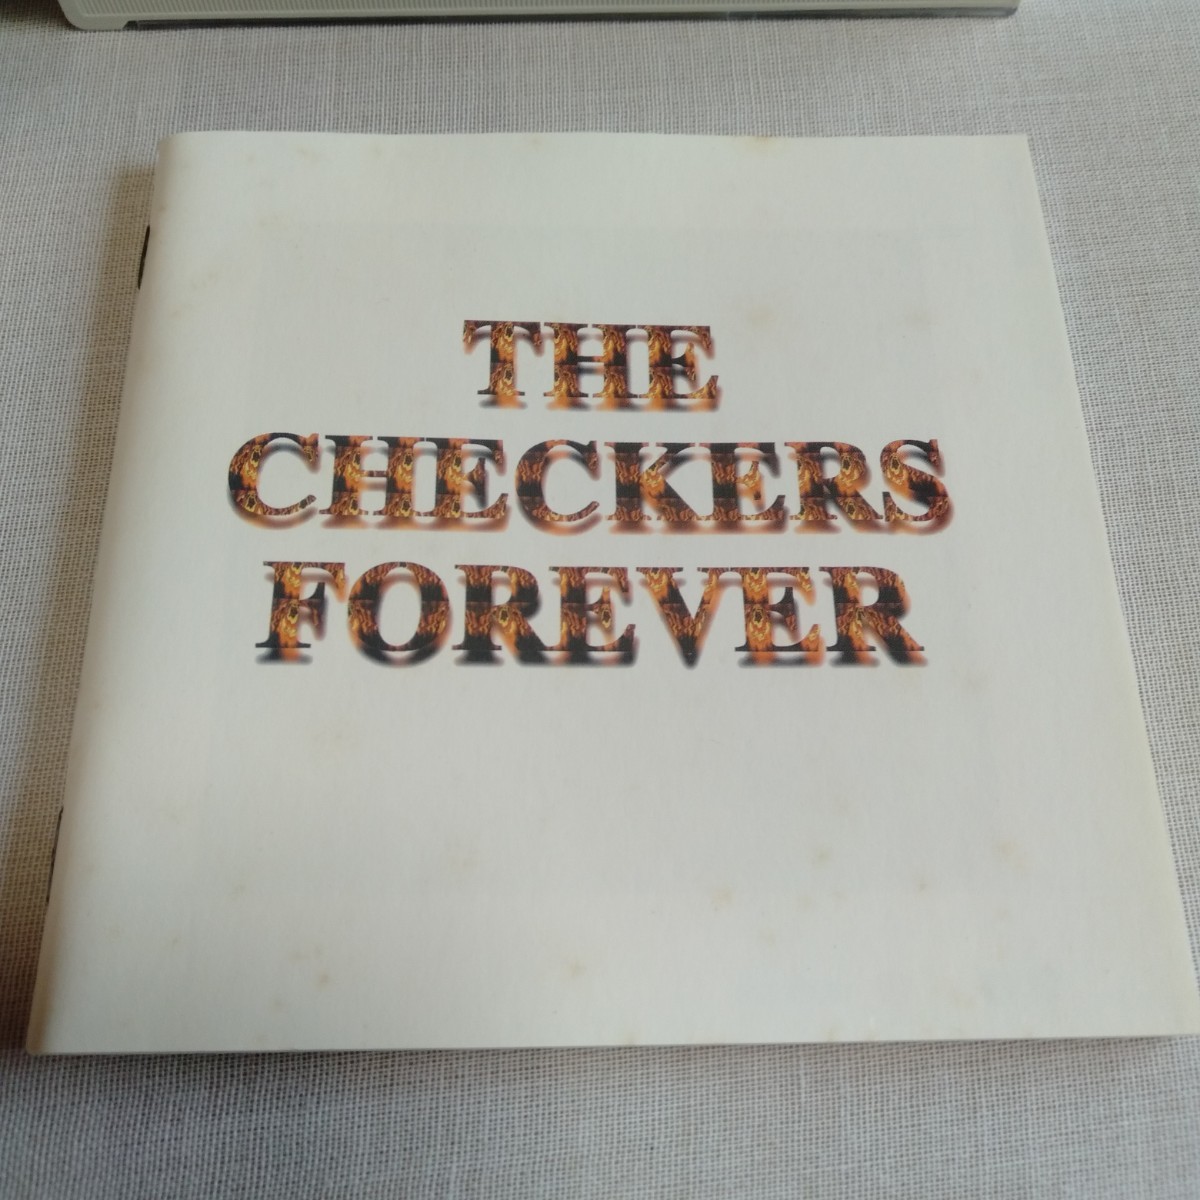 S156 The Checkers THE CHECKERS FINAL CD case condition A